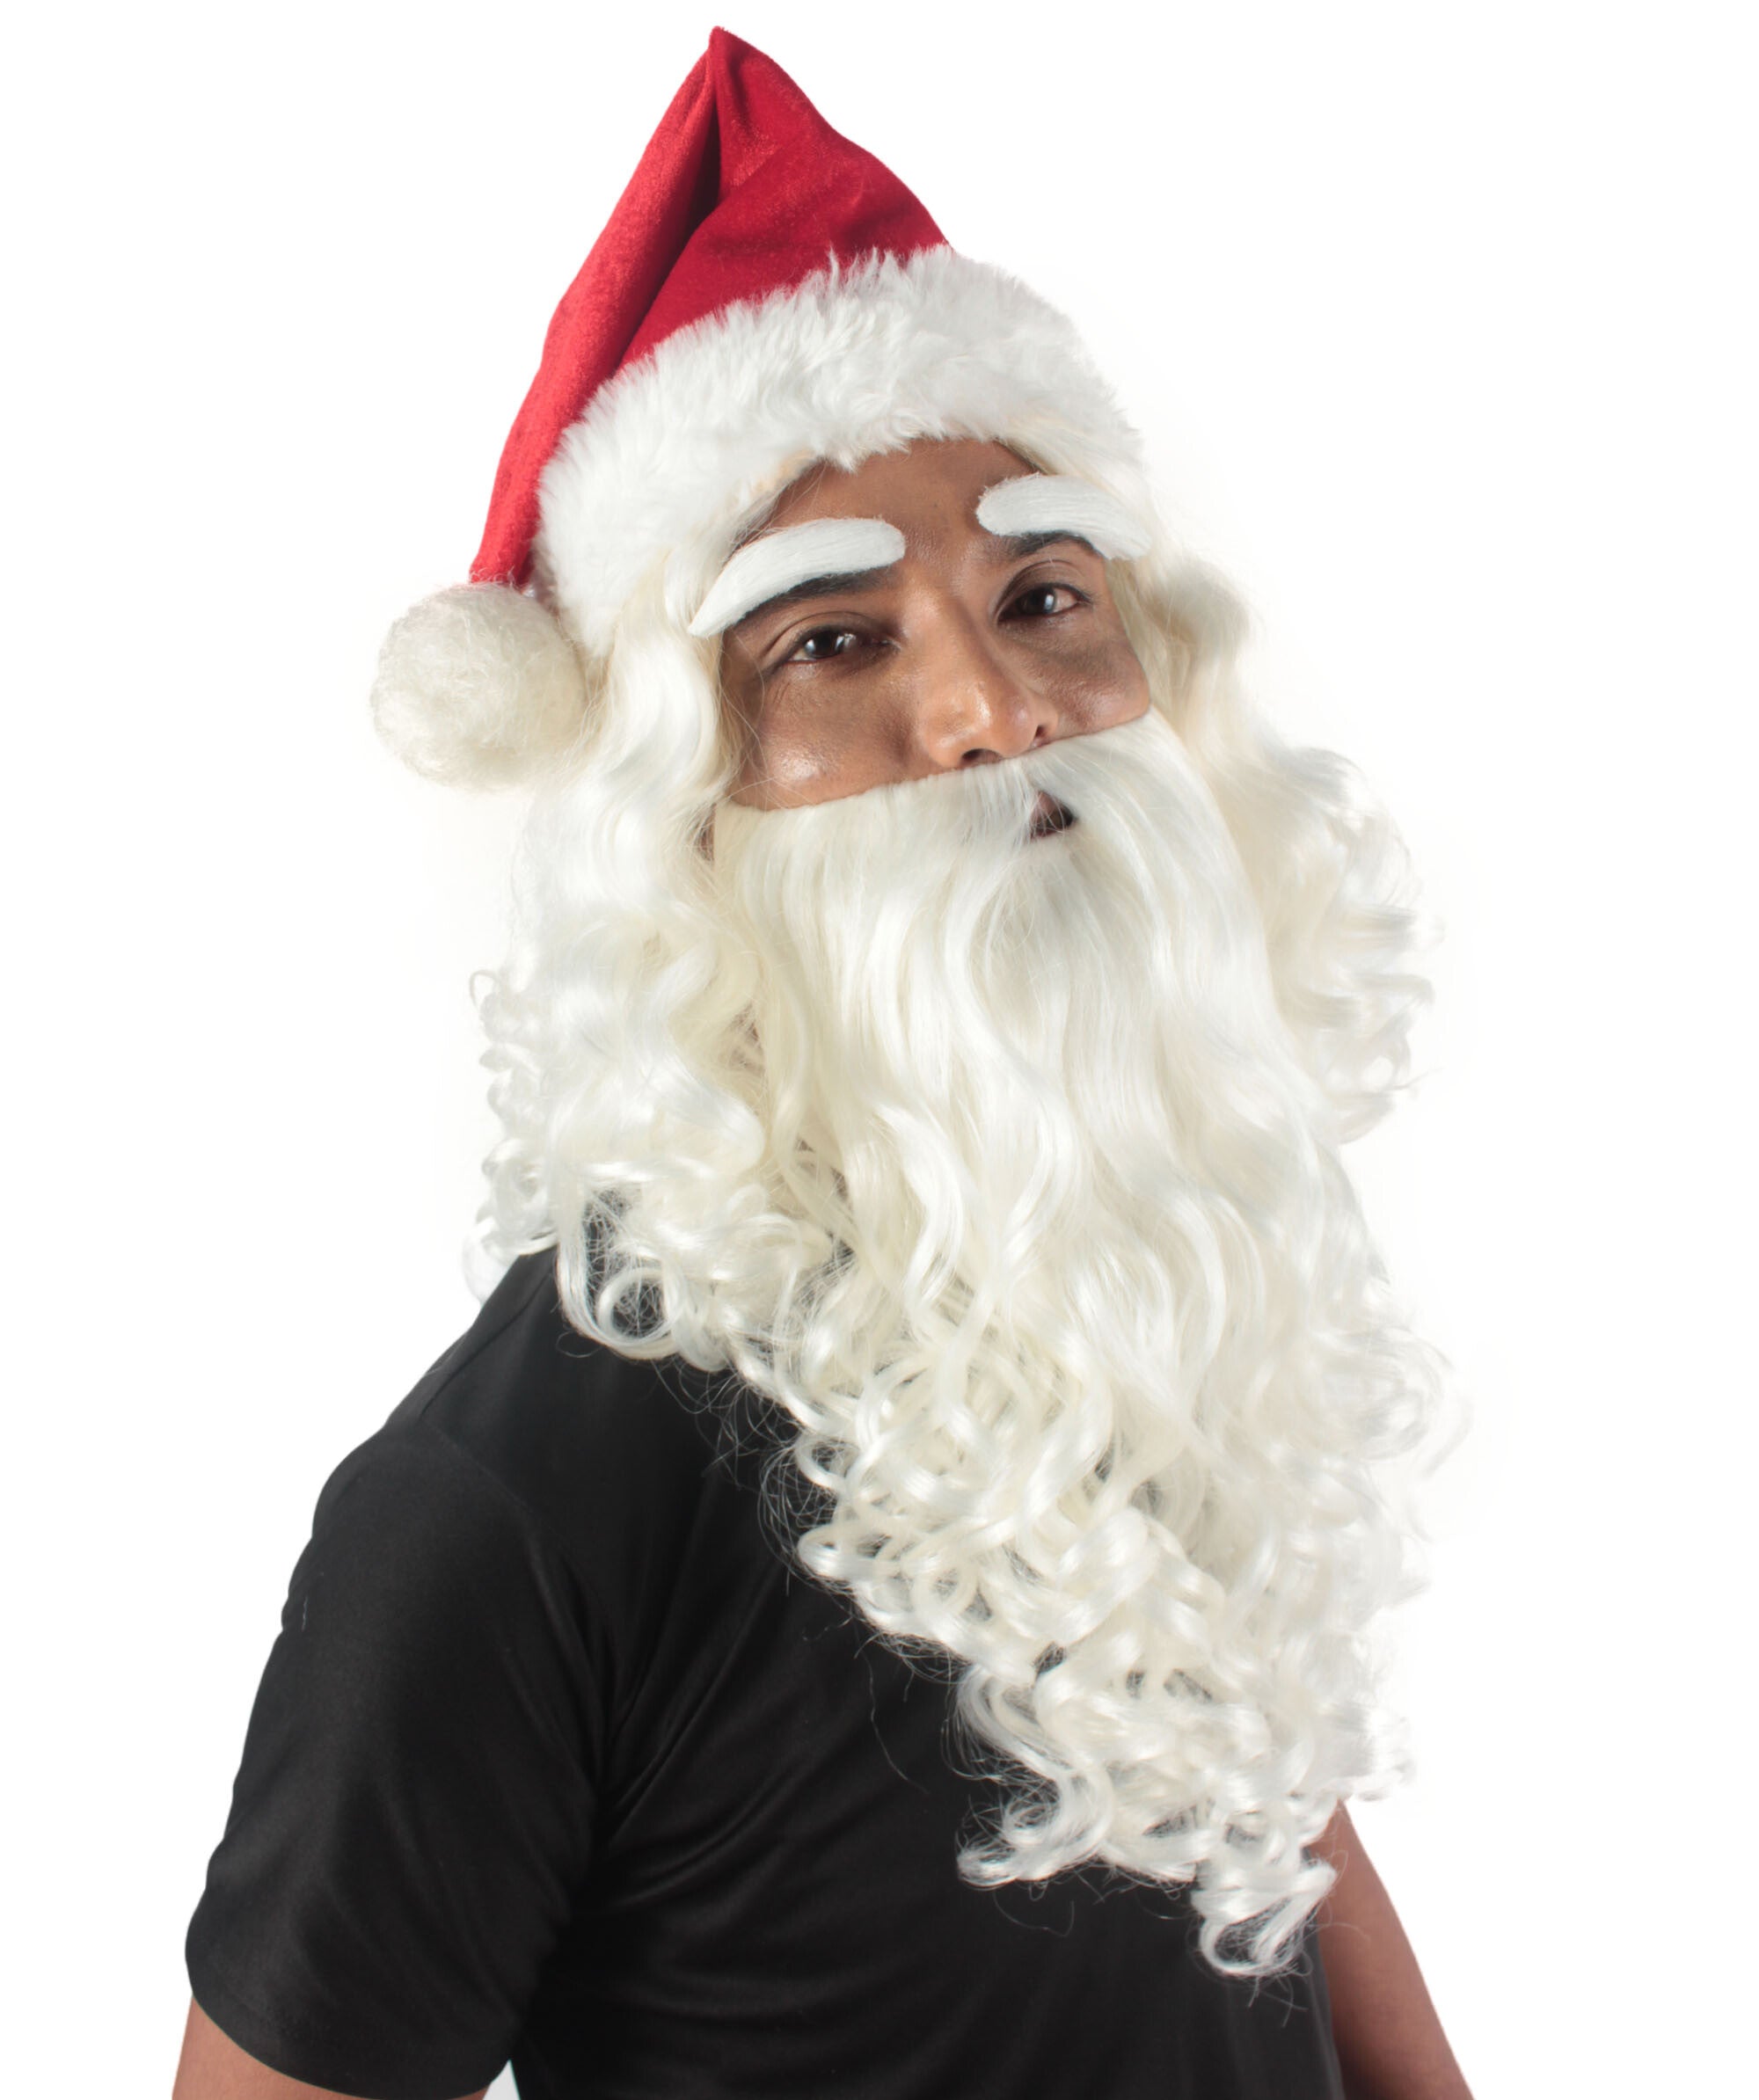 Adult Unisex Christmas Santa White Wig Beard And Red Hat Set, Long Synthetic Fibers